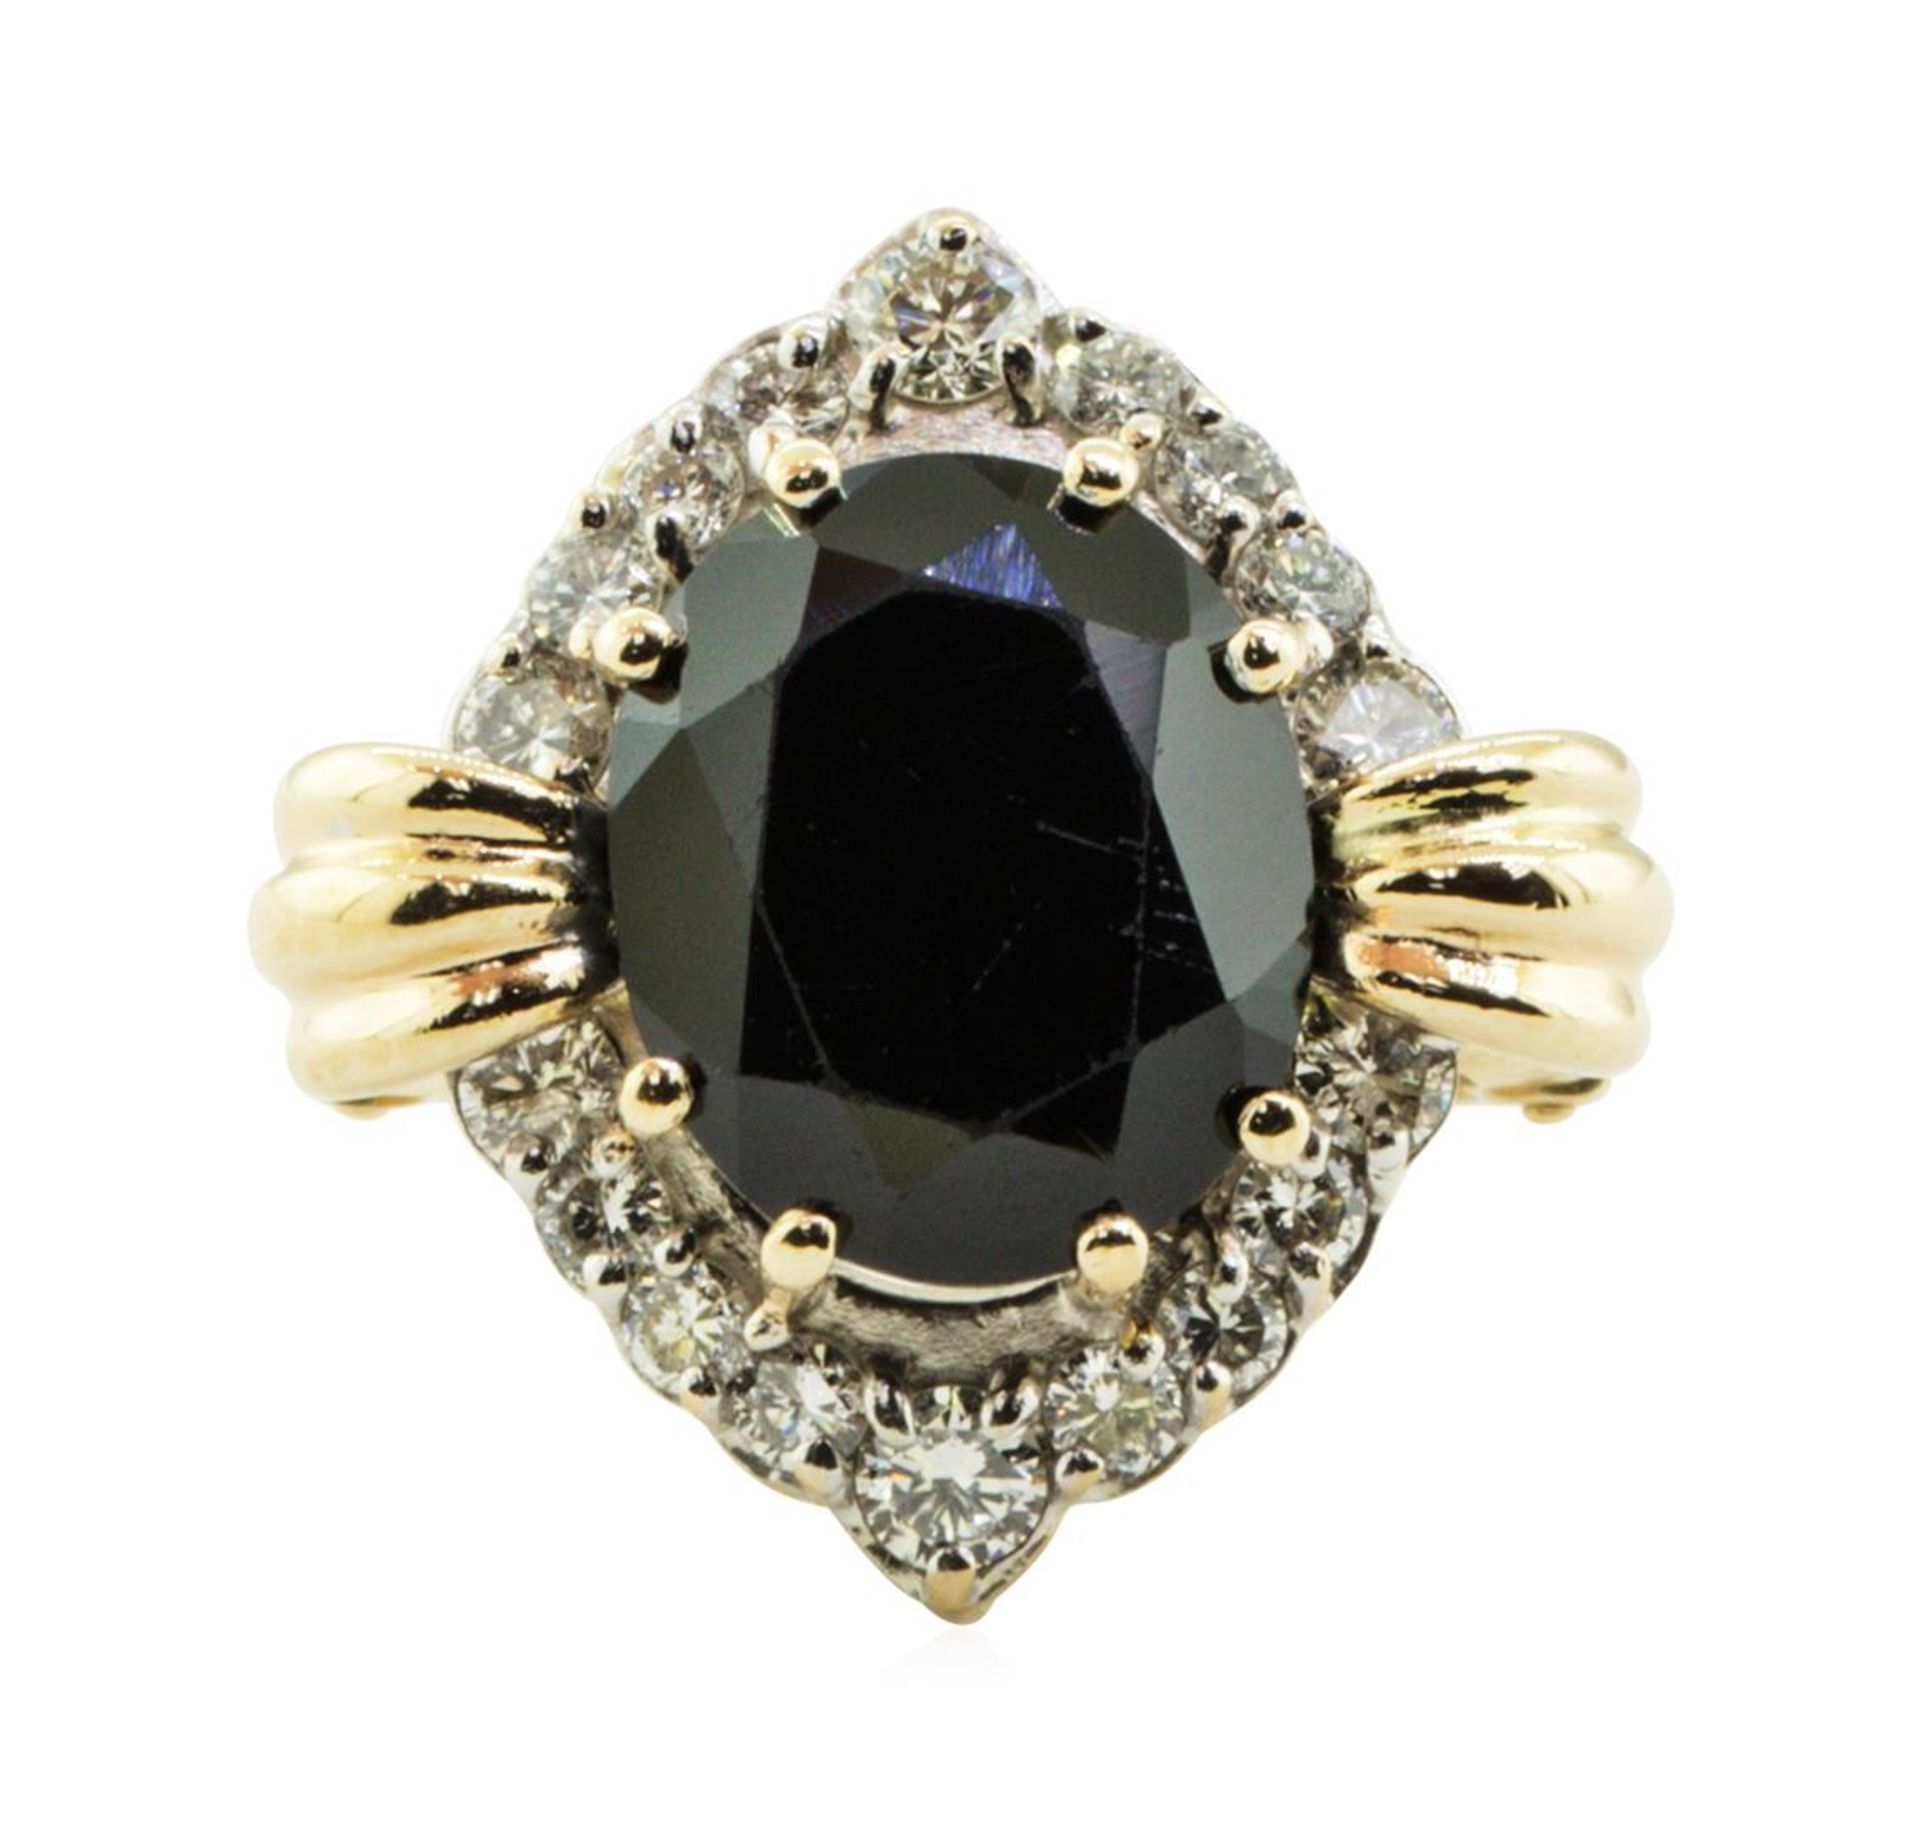 5.75 ctw Oval Brilliant Onyx And Diamond Ring - 14KT Yellow And White Gold - Image 2 of 5